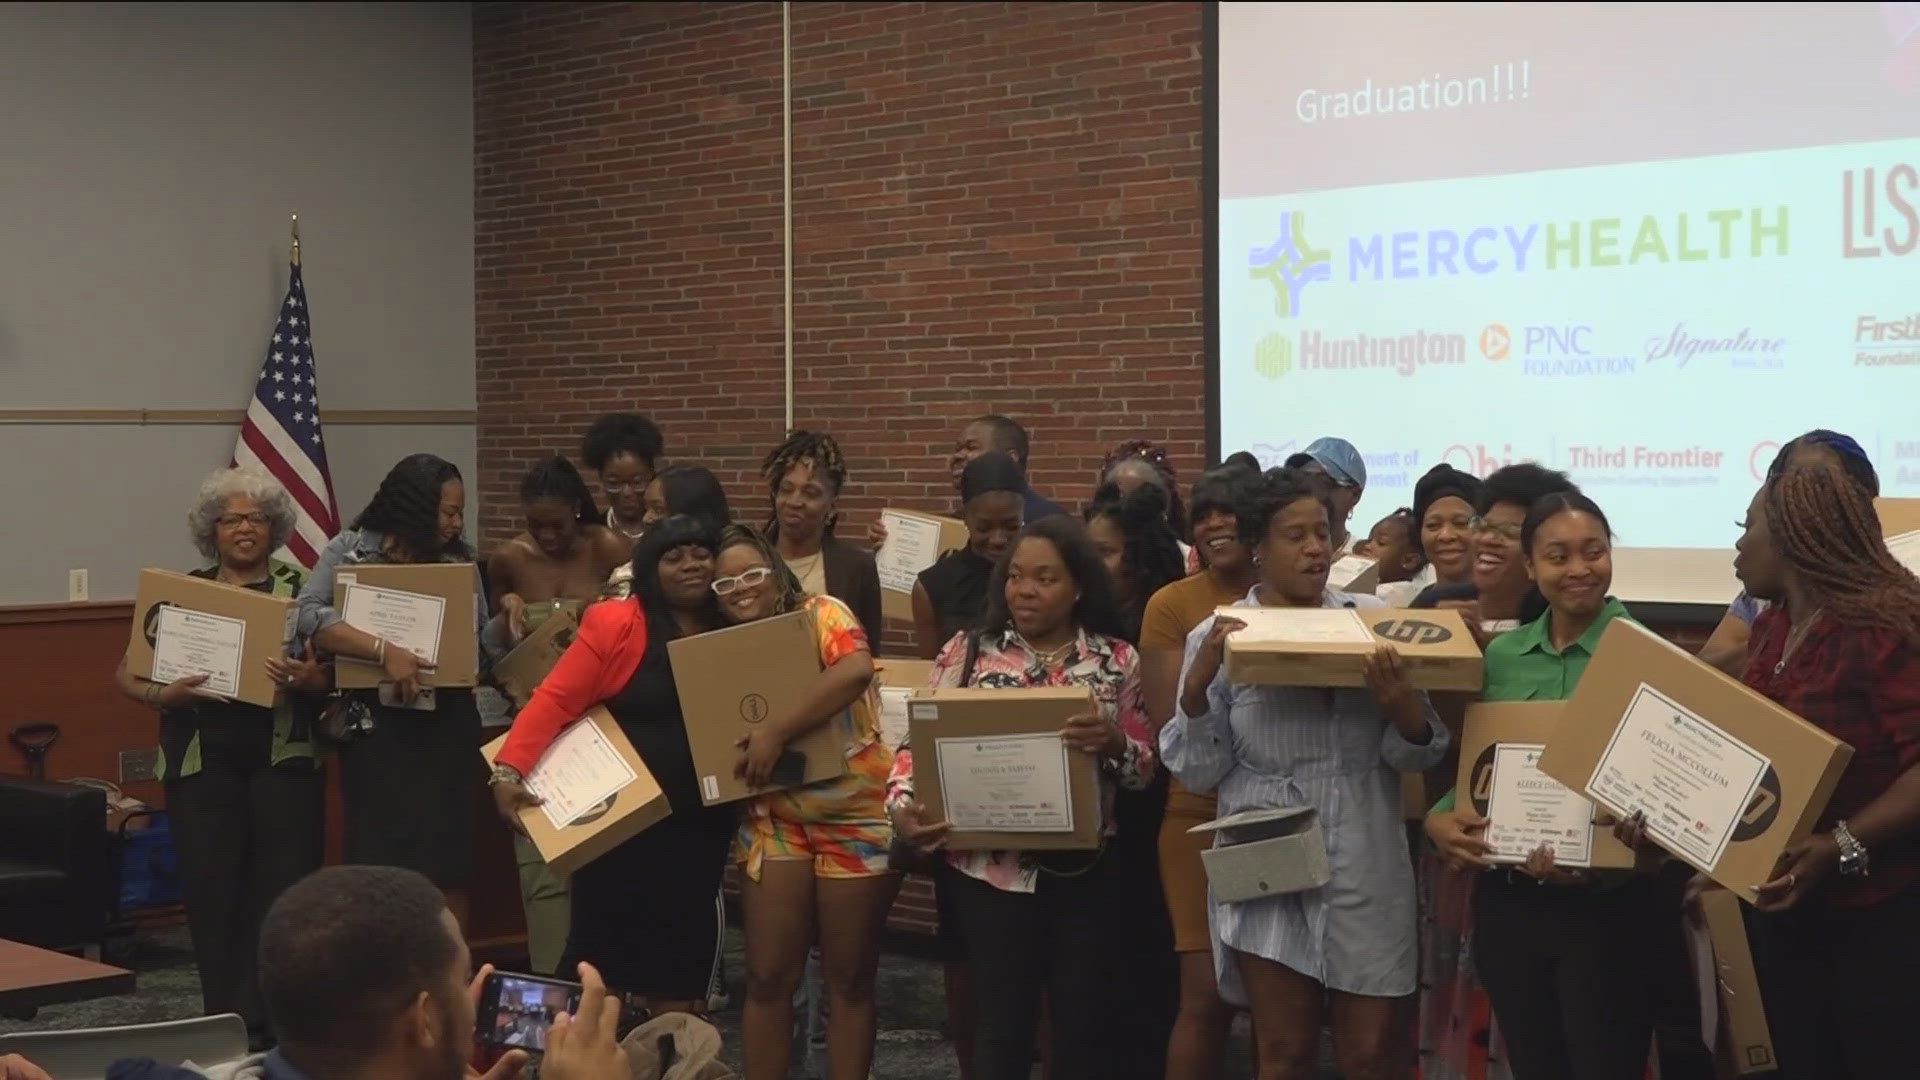 About 50 people graduated from Mercy Health's "Getting Your Business Rolling" program on Monday prepared for their future in entrepreneurship.